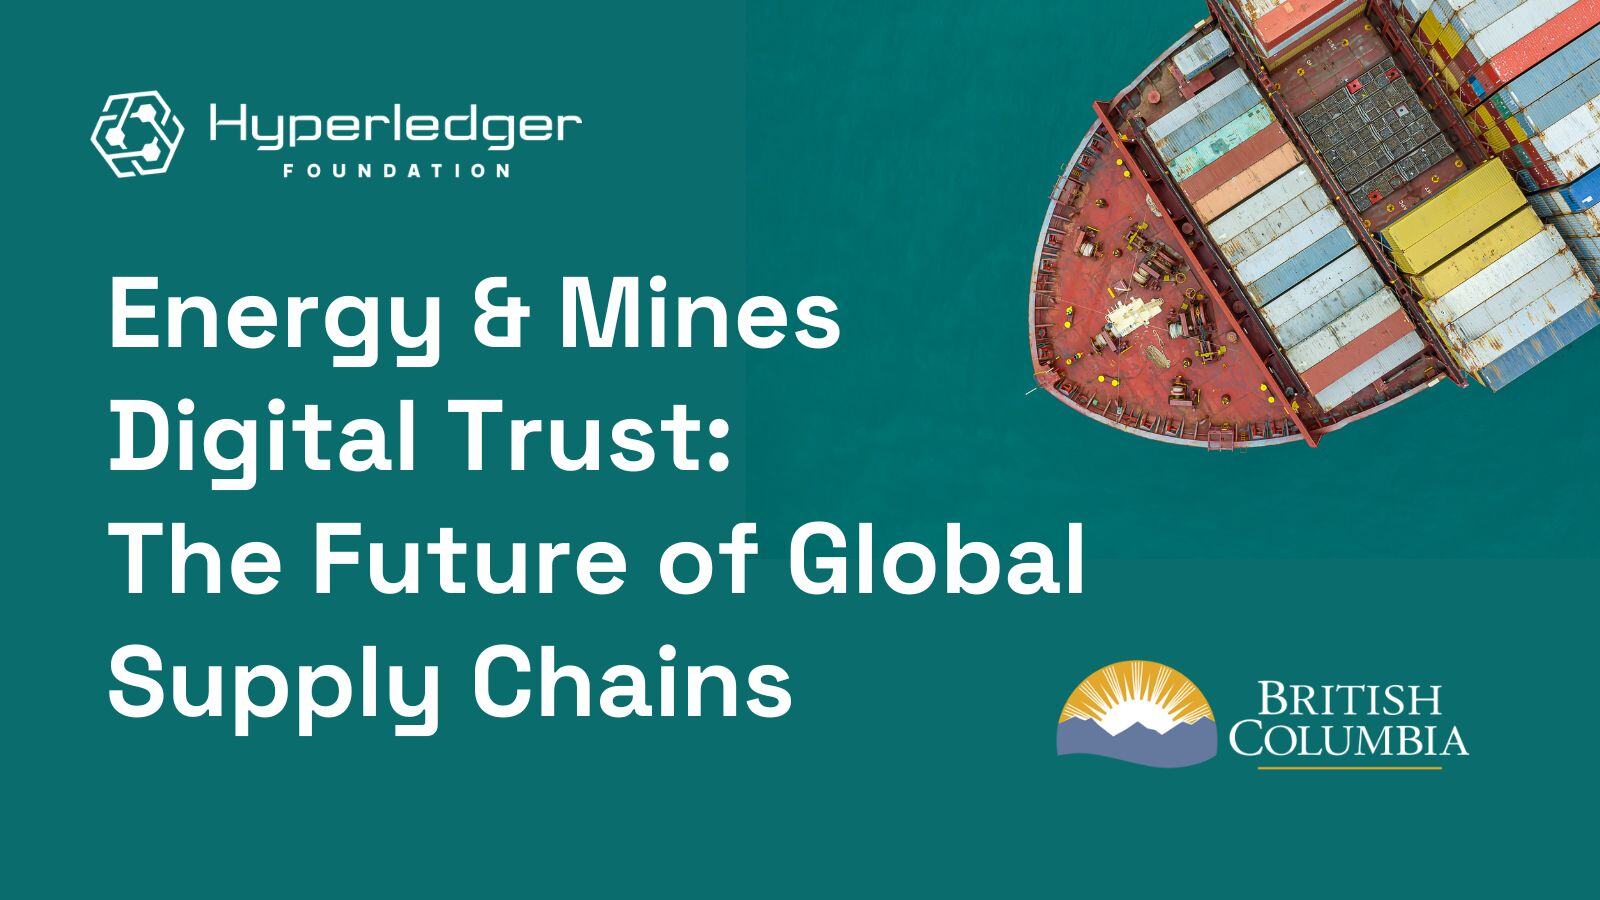 Energy & Mines Digital Trust: The Future of Global Supply Chains